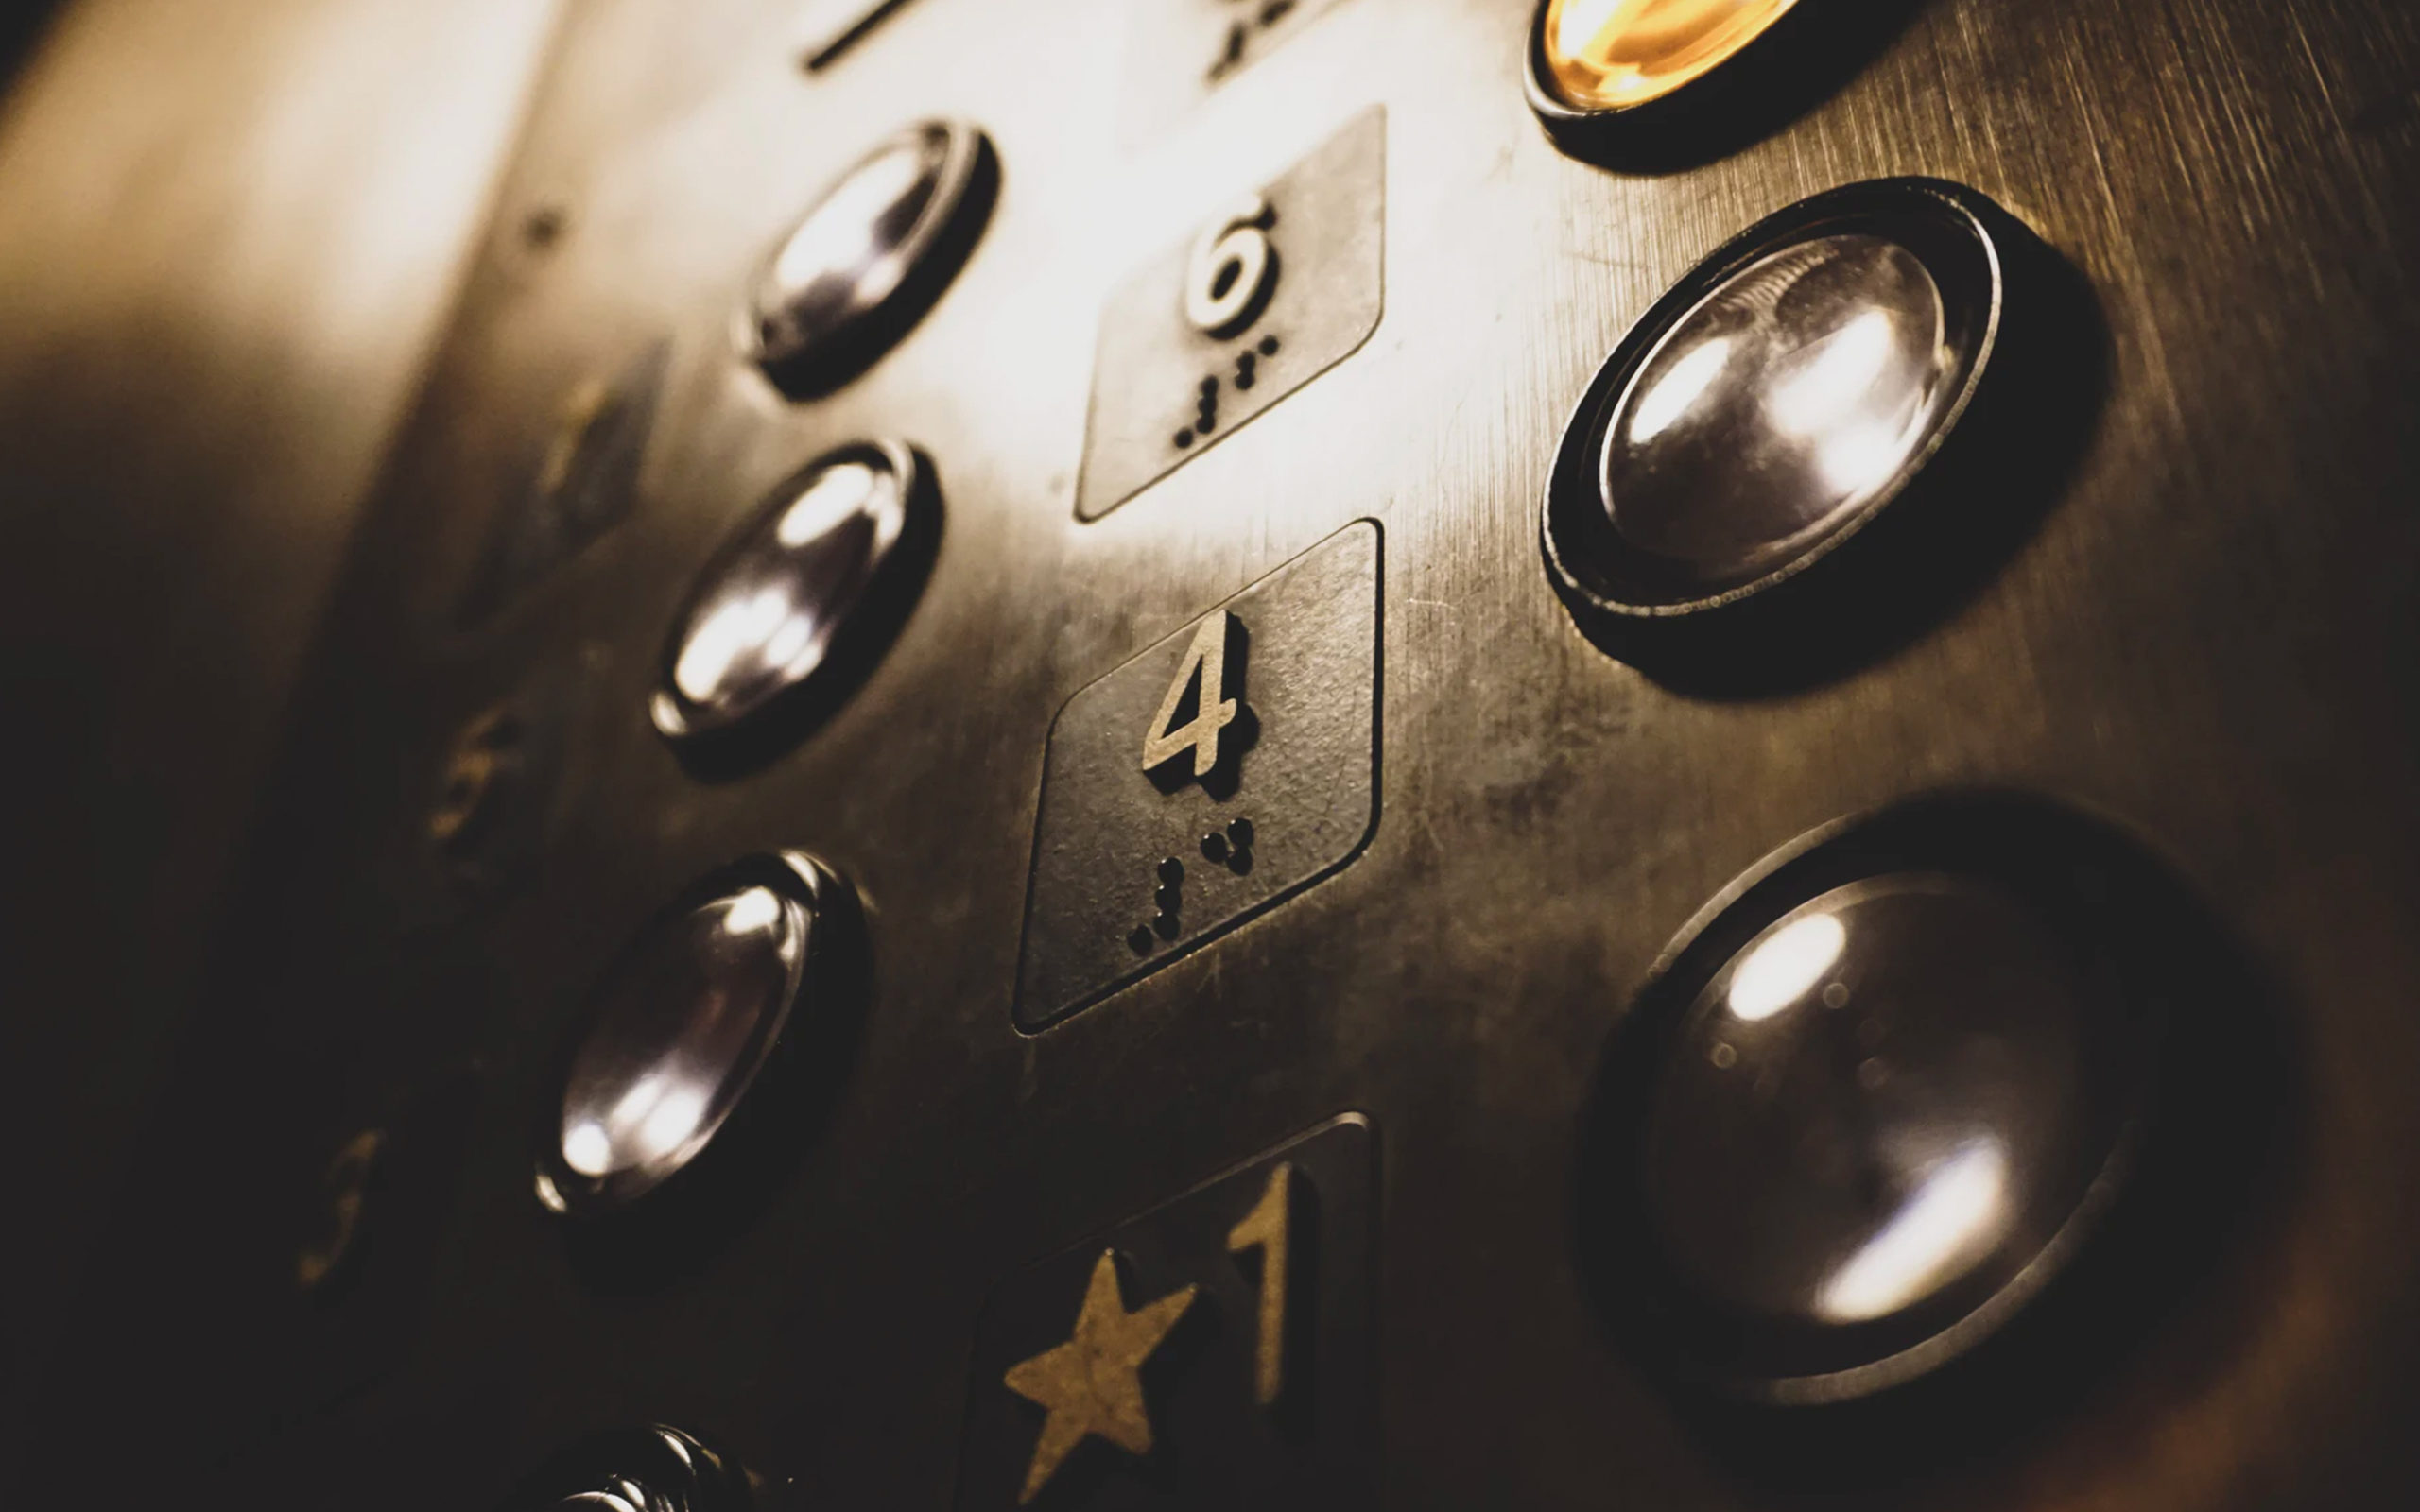 Elevator buttons.